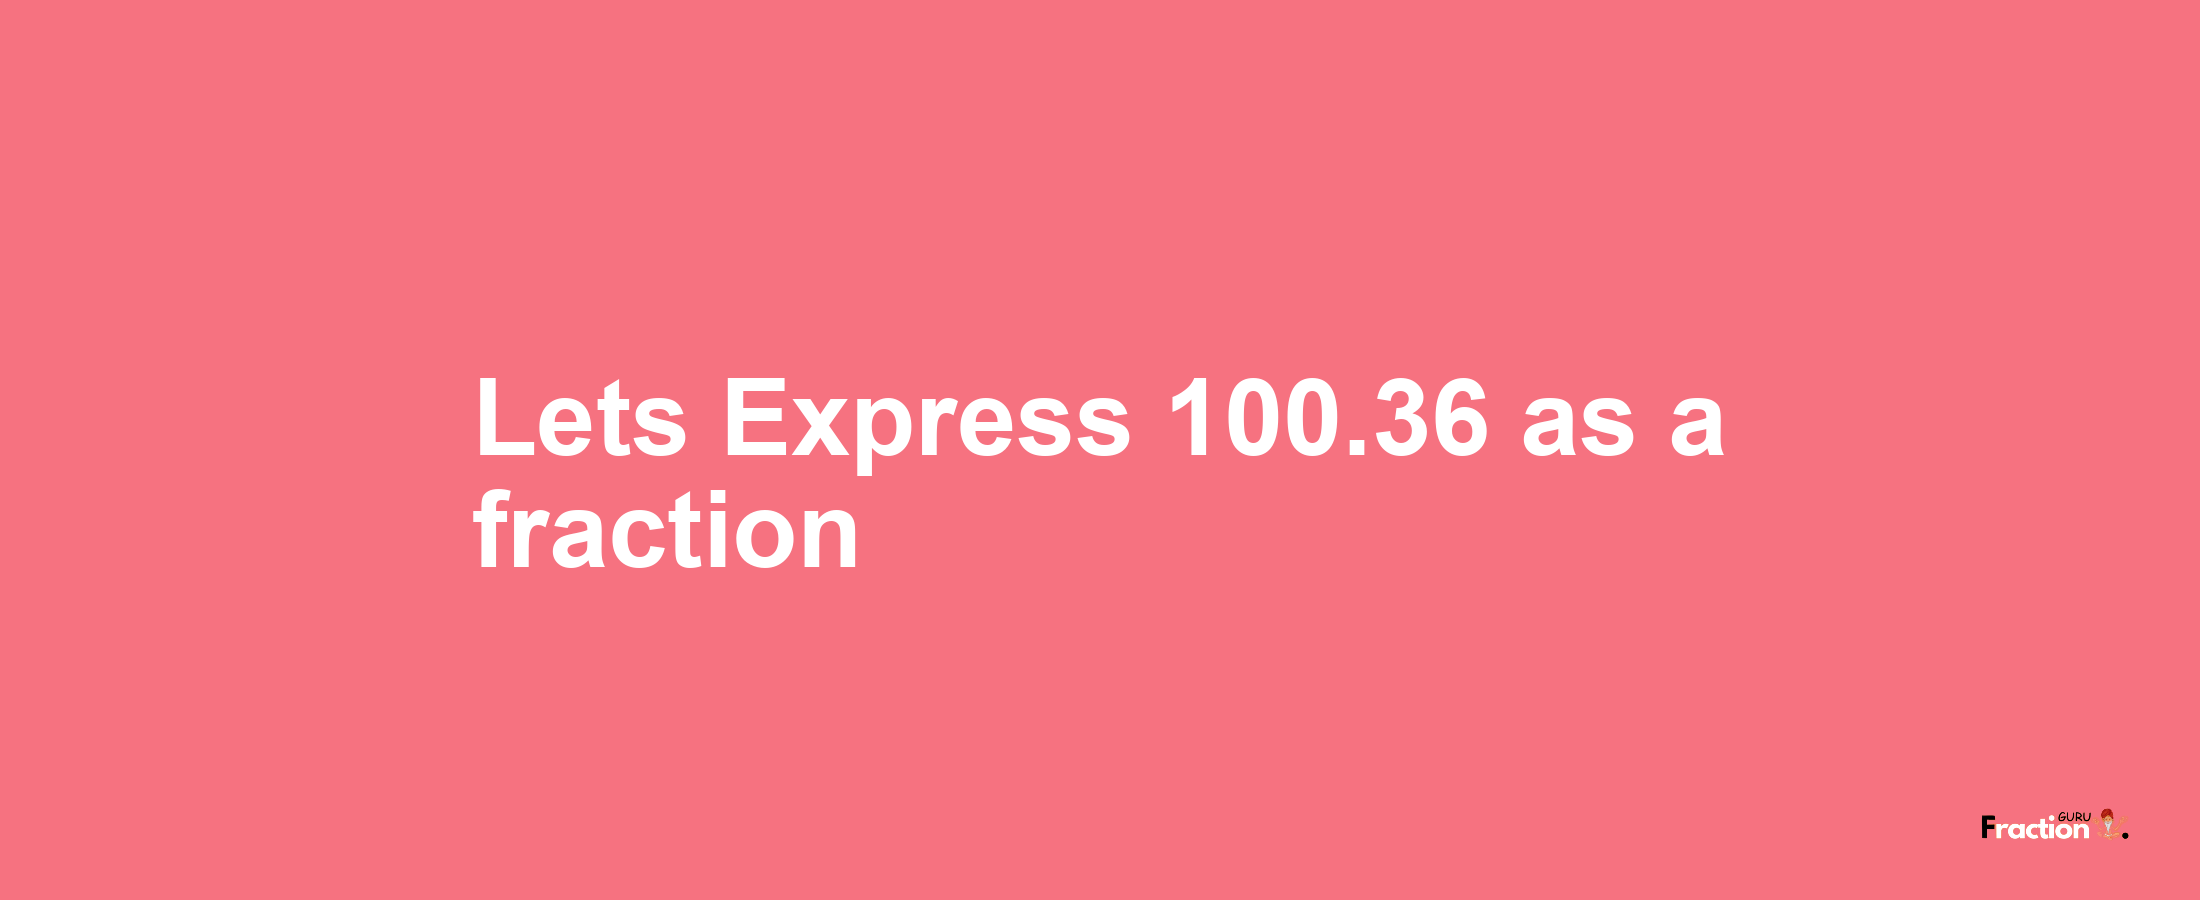 Lets Express 100.36 as afraction